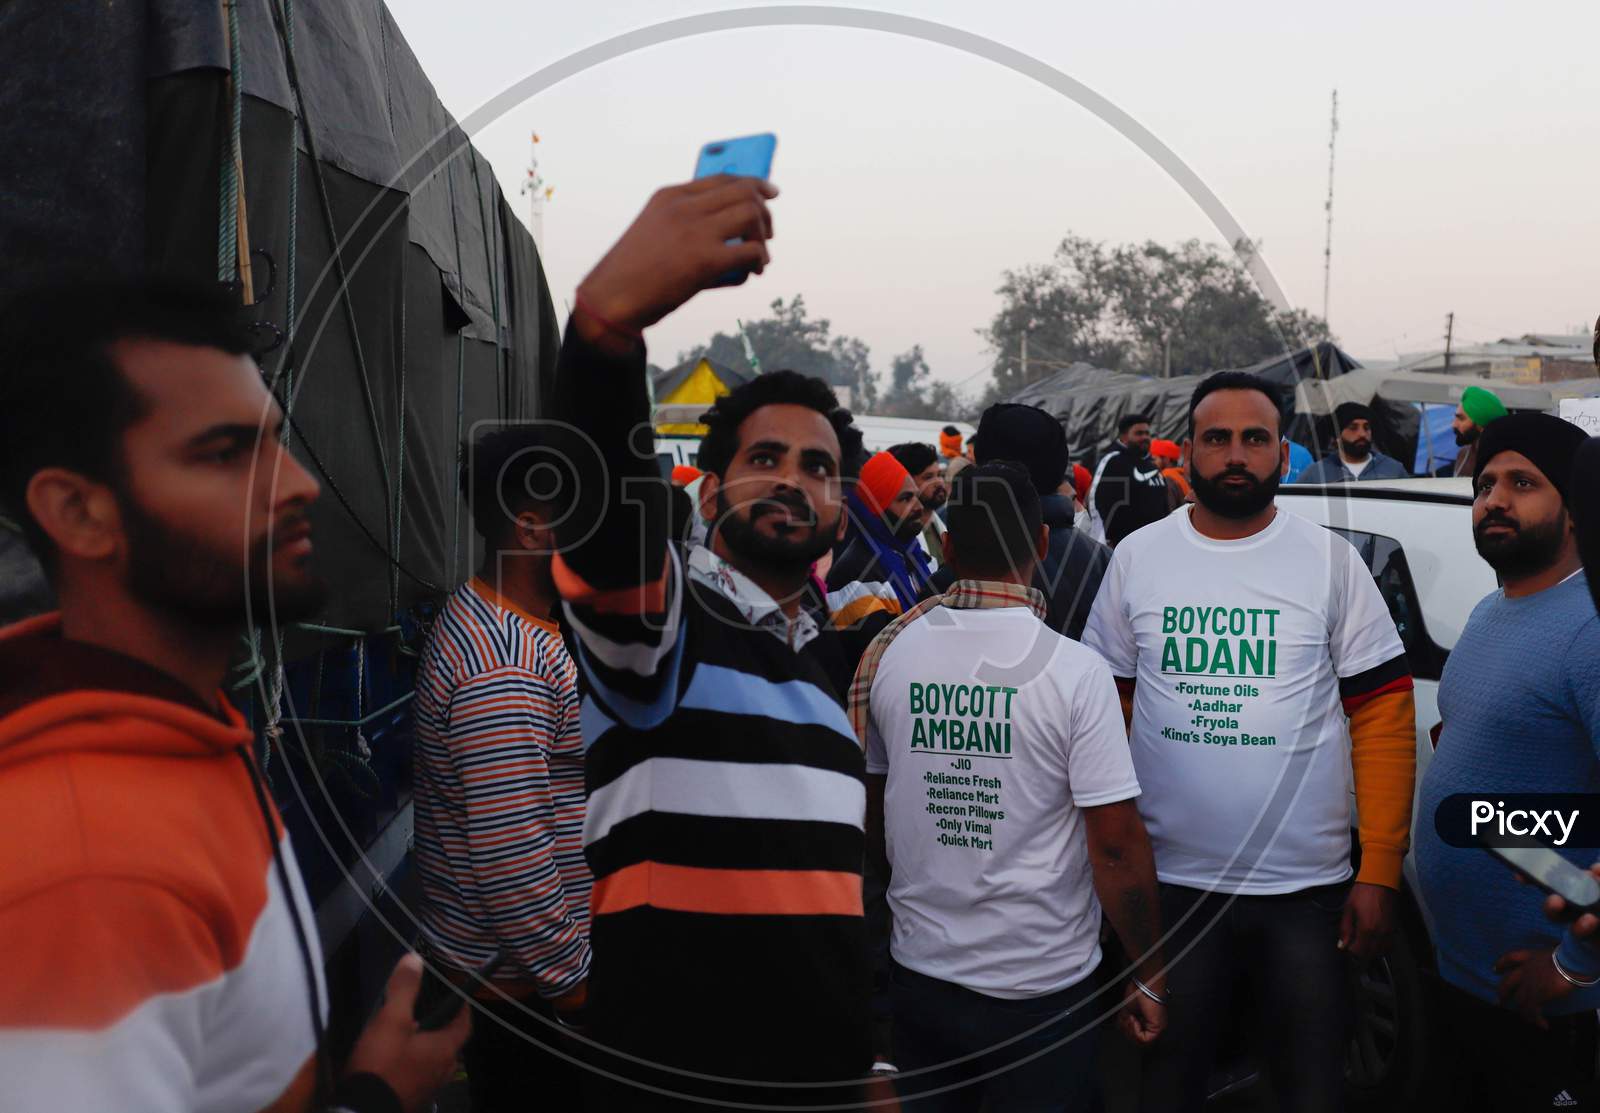 Farmers Wearing T-Shirts With A Slogans “Boycott Adani, Boycott Ambani’ To Protest Against Corporate Businesses Following The Recent Passing Of Agriculture Reform Laws, At Singh Border, On December 13, 2020 In New Delhi, India. Thousands Of Farmers Are Protesting On Various Borders Of The National C